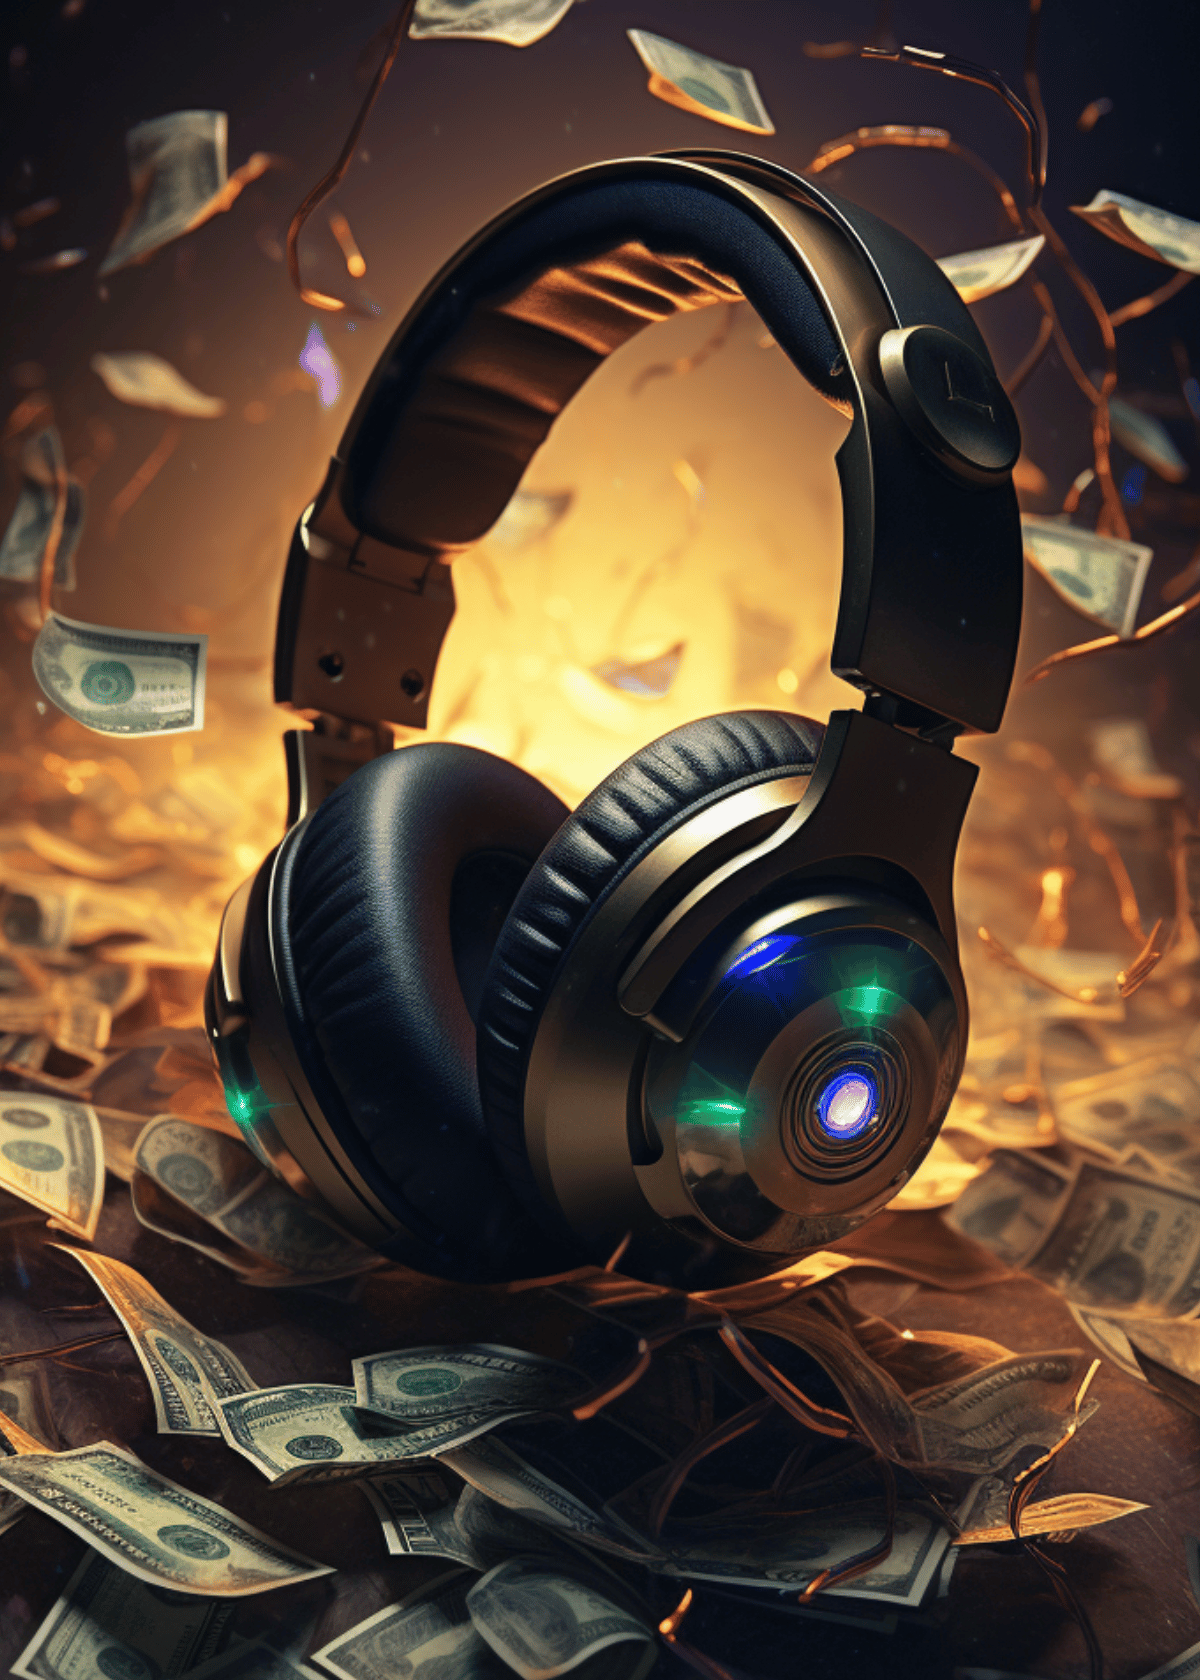 Gamers Are Going Crazy Over The Price & Quality Of The Best Gaming Headset Under $100! 🤪